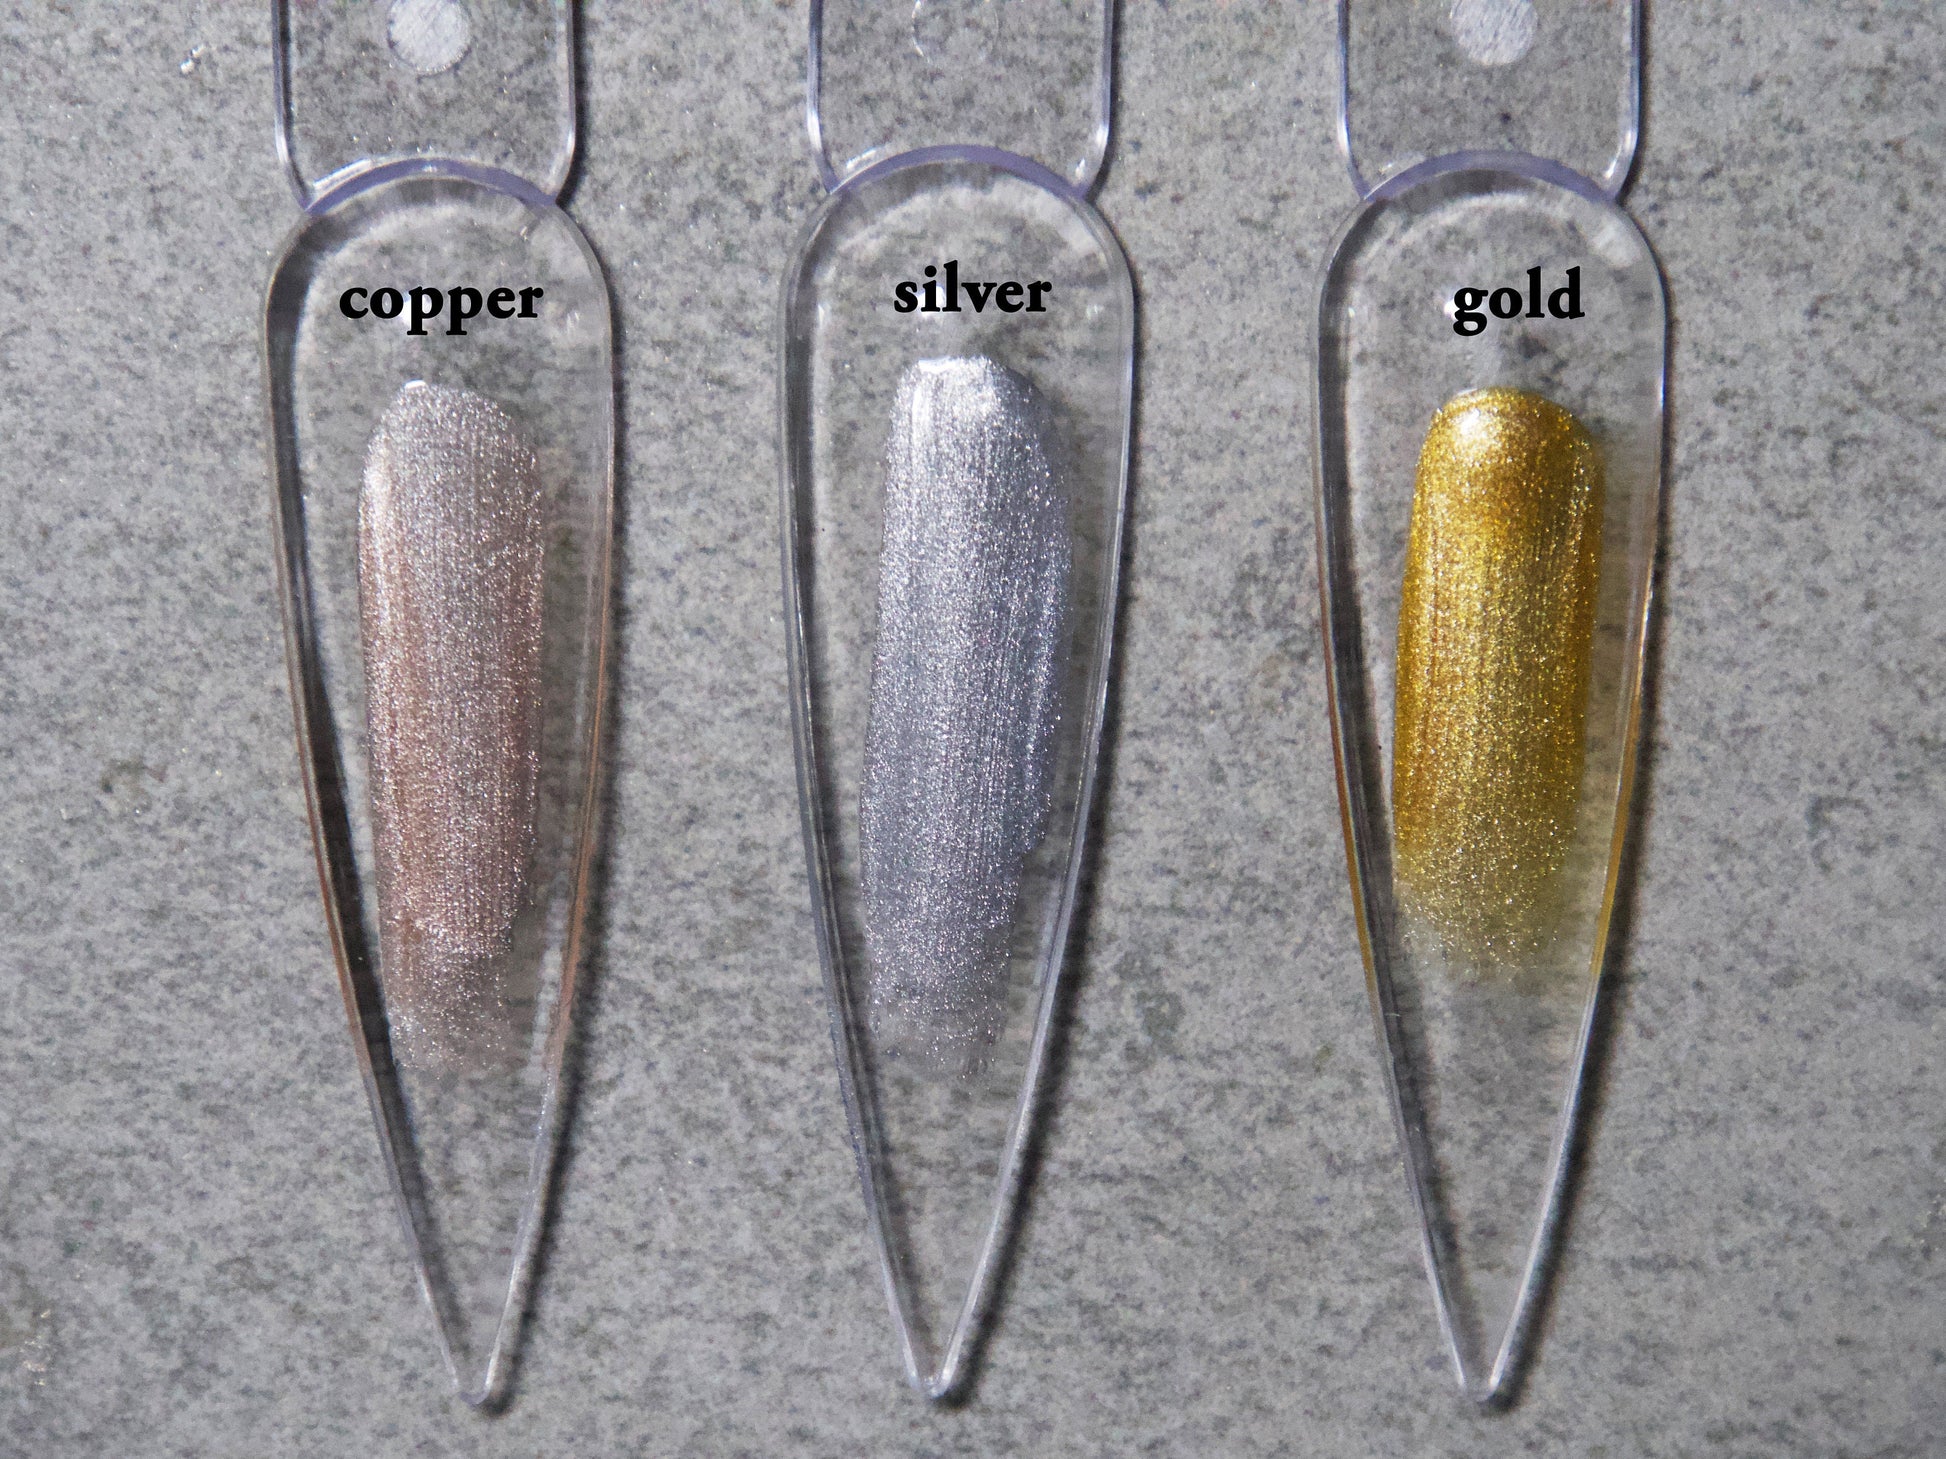 5ml Metallic Painting nail gel/ Gold French Tip Lining nail art/ Silver Rose Gold Glittery UV gel Soak off Nail art Manicure Pedicure Supply